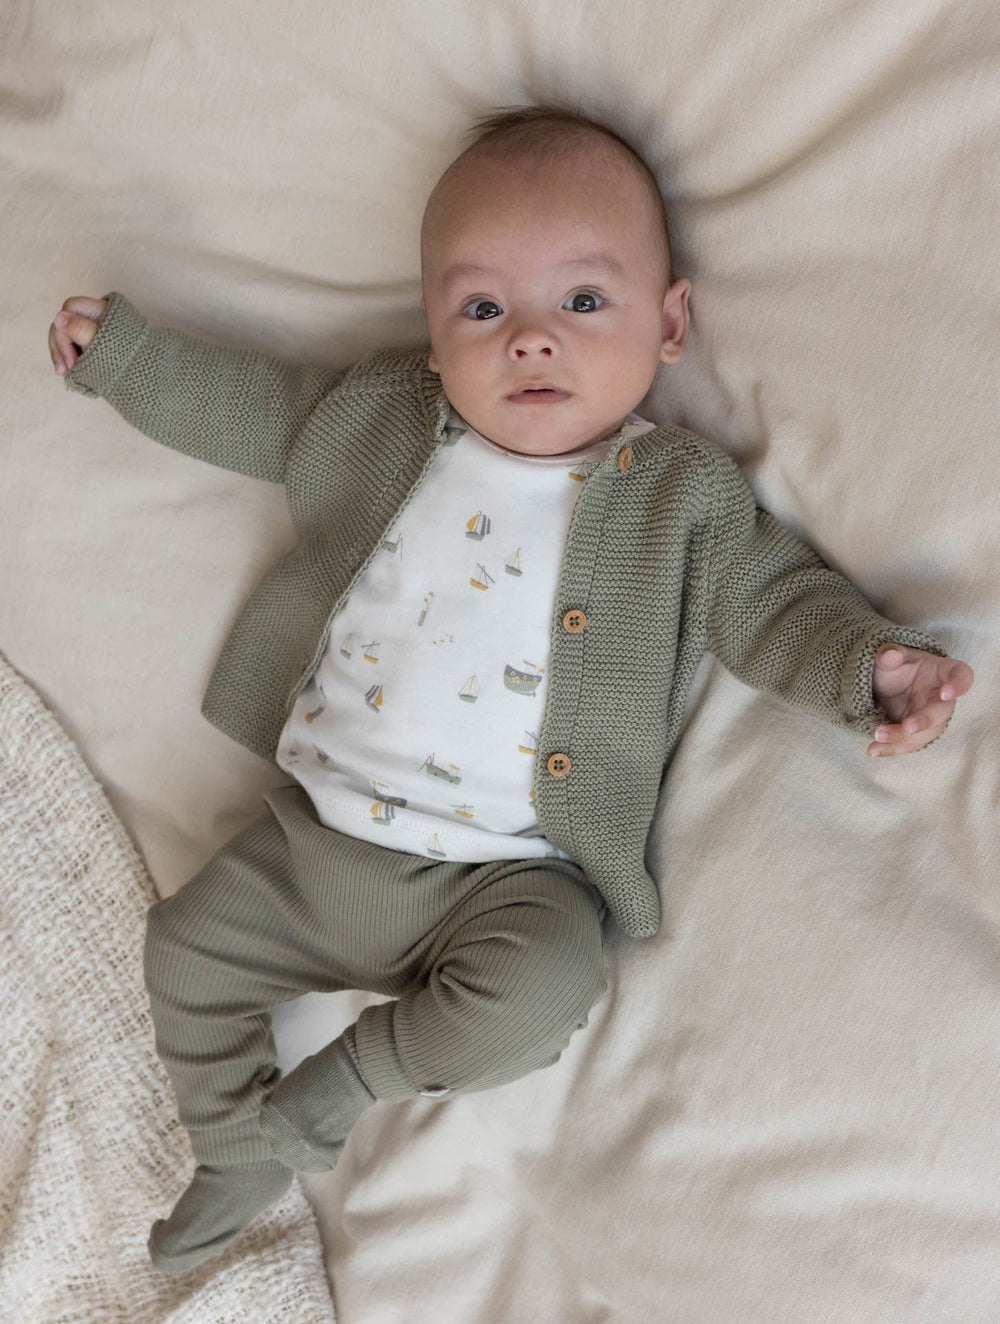 Little Dutch - Knitted Cardigan - Olive - Mabel & Fox